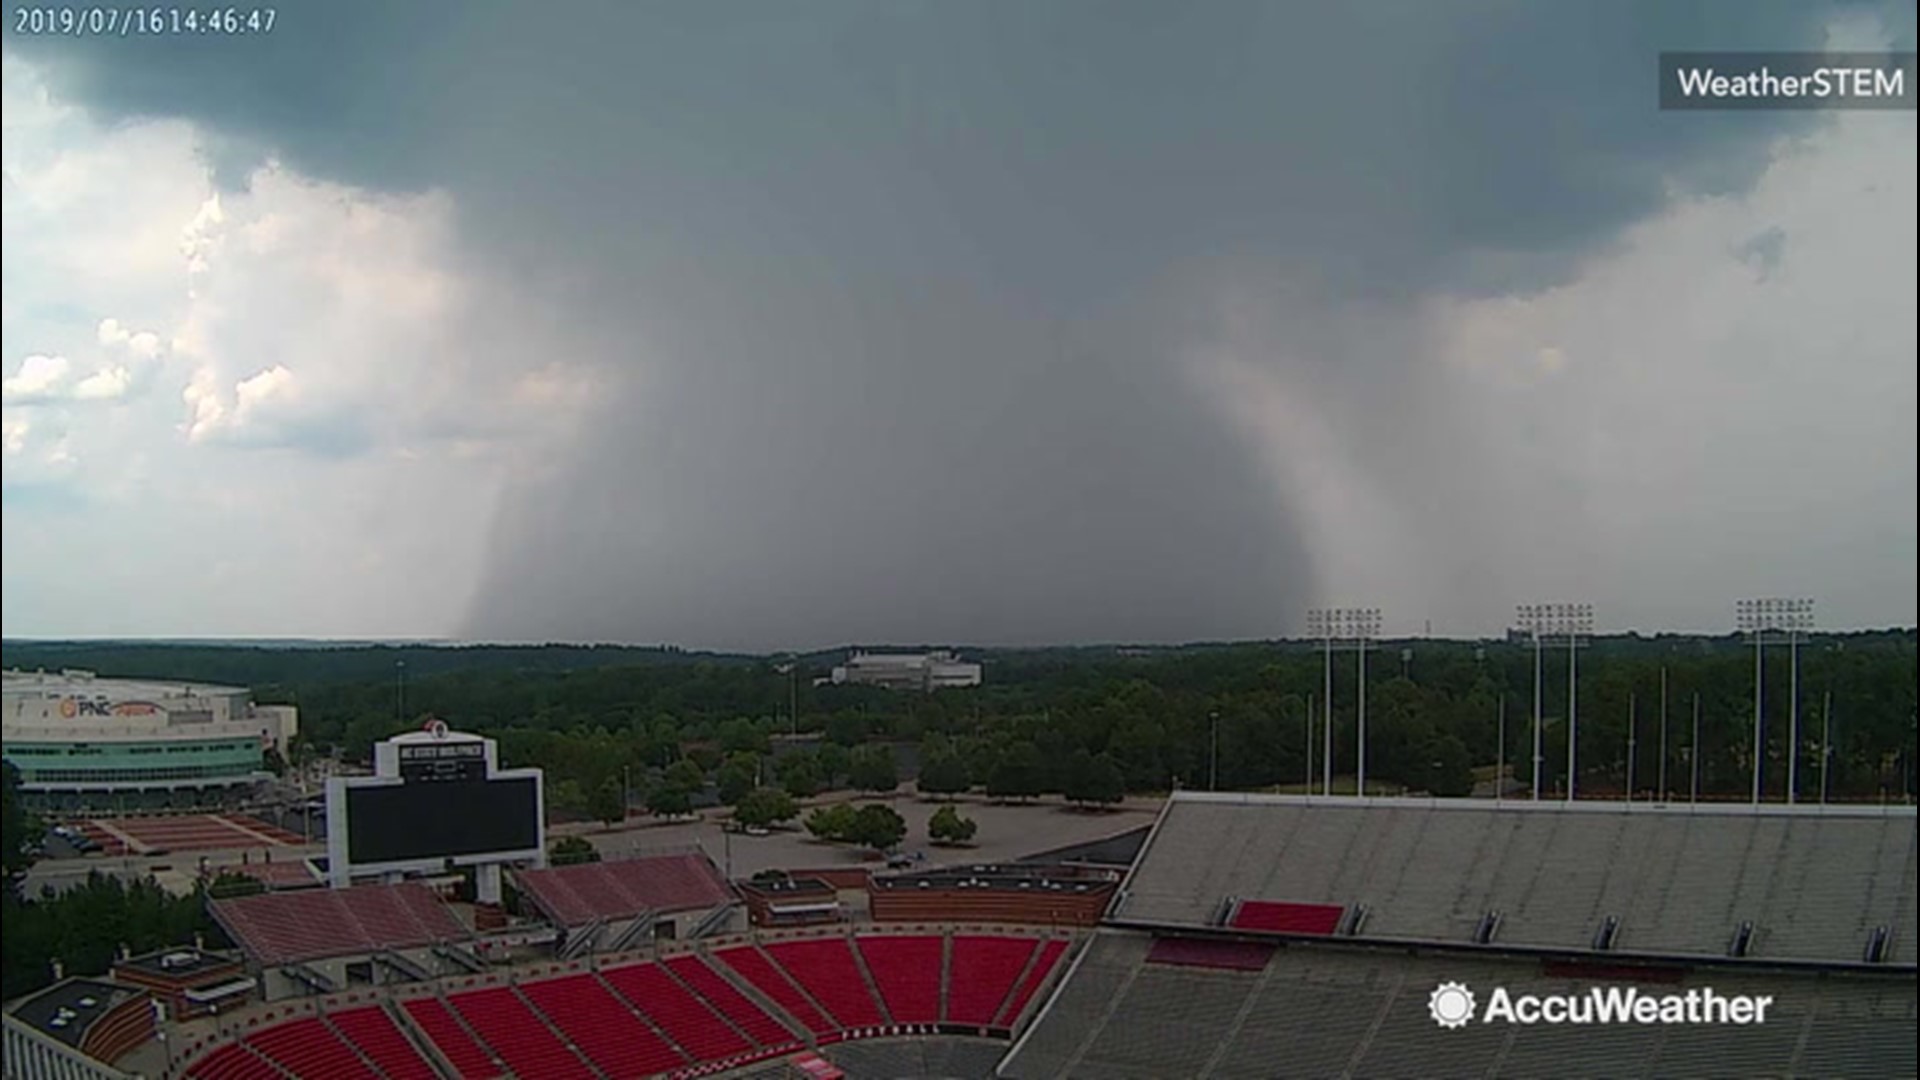 A 'wet microburst' from a severe thunderstorm descended on Raleigh, North Carolina, on July 17.